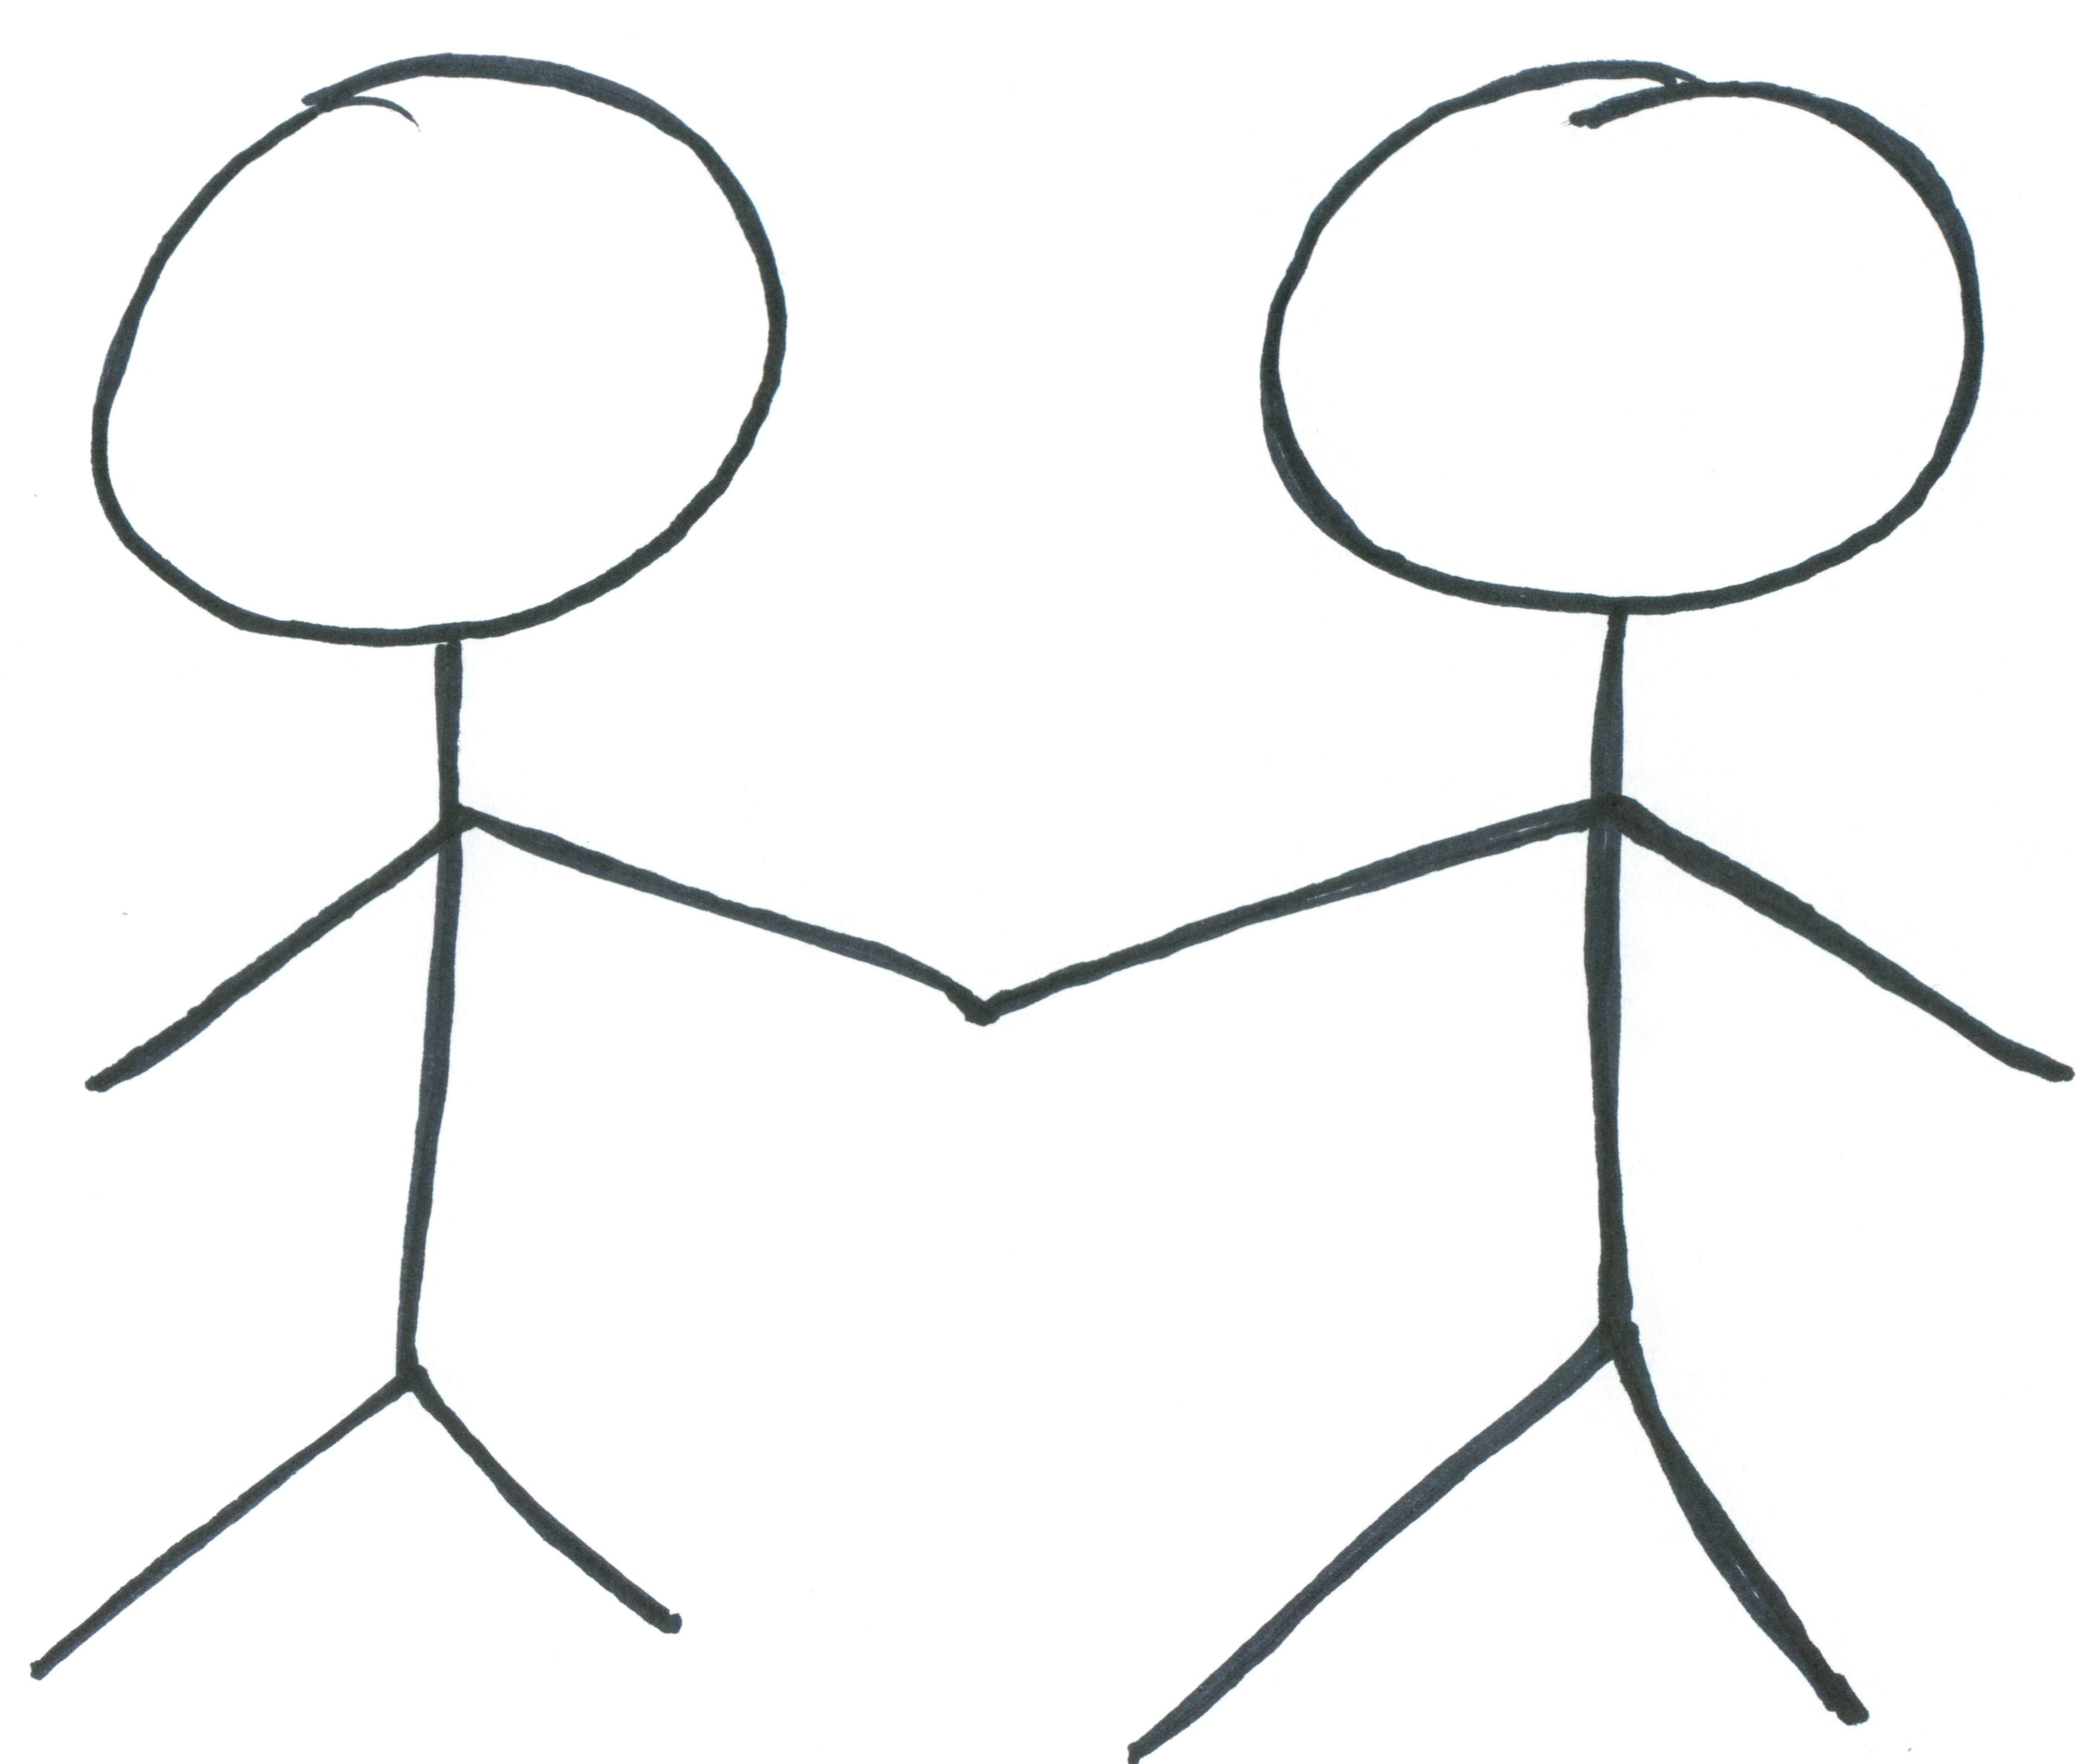 Stick People Holding Hands Clipart   Clipart Panda   Free Clipart